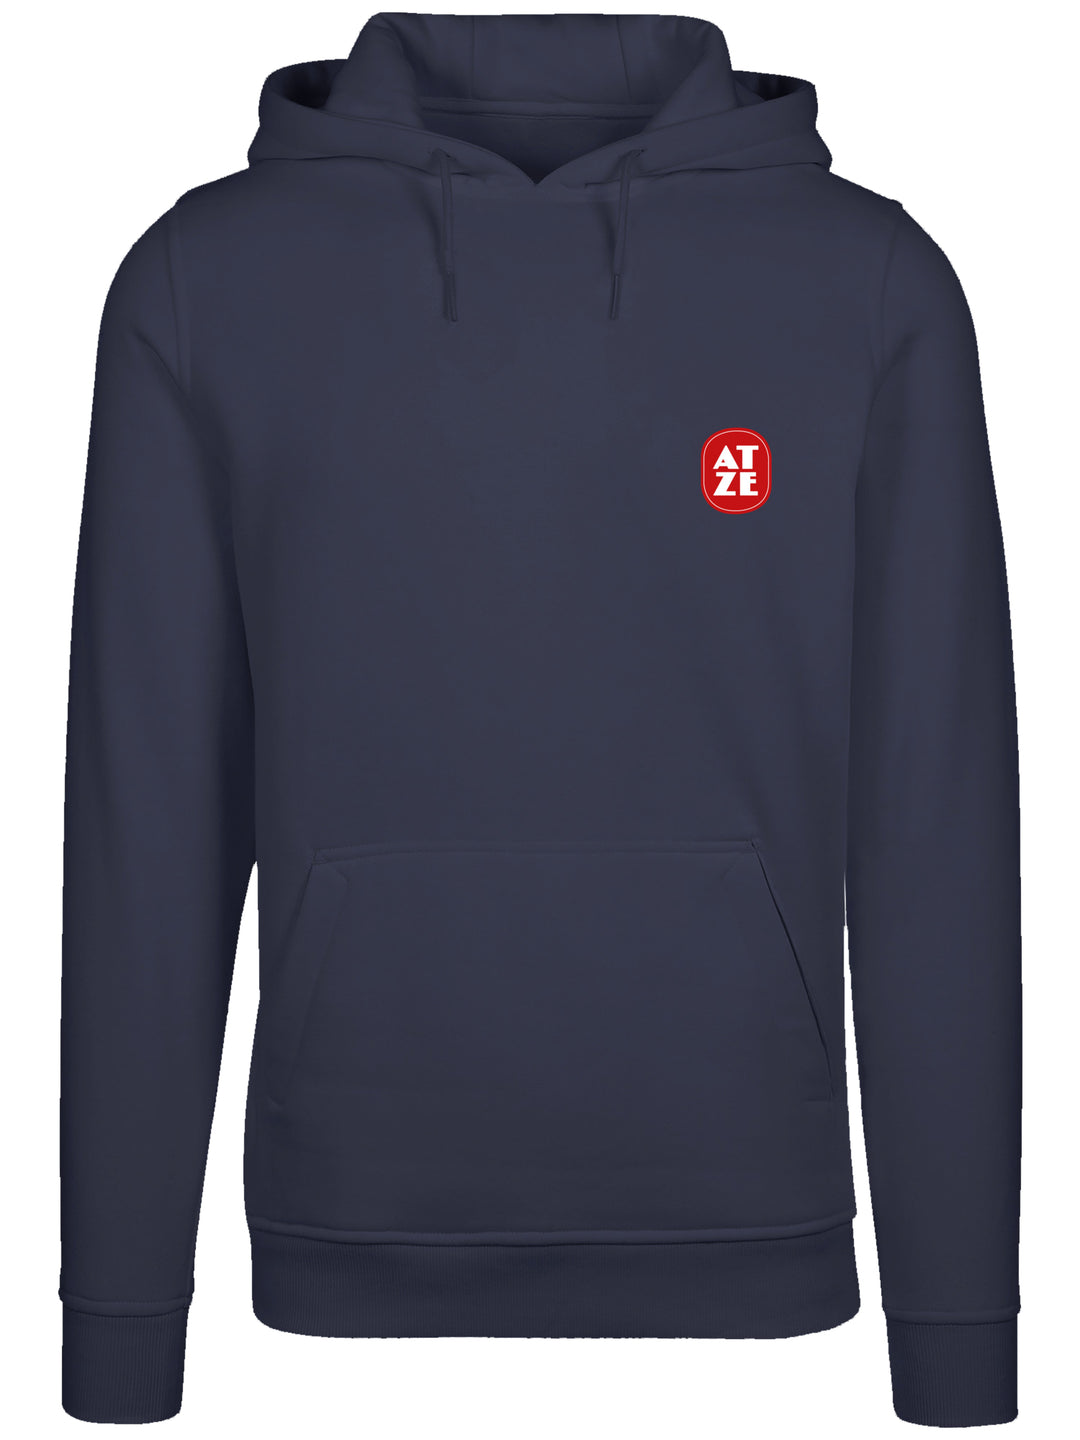 Atze Logo with Fitted heavy hoody